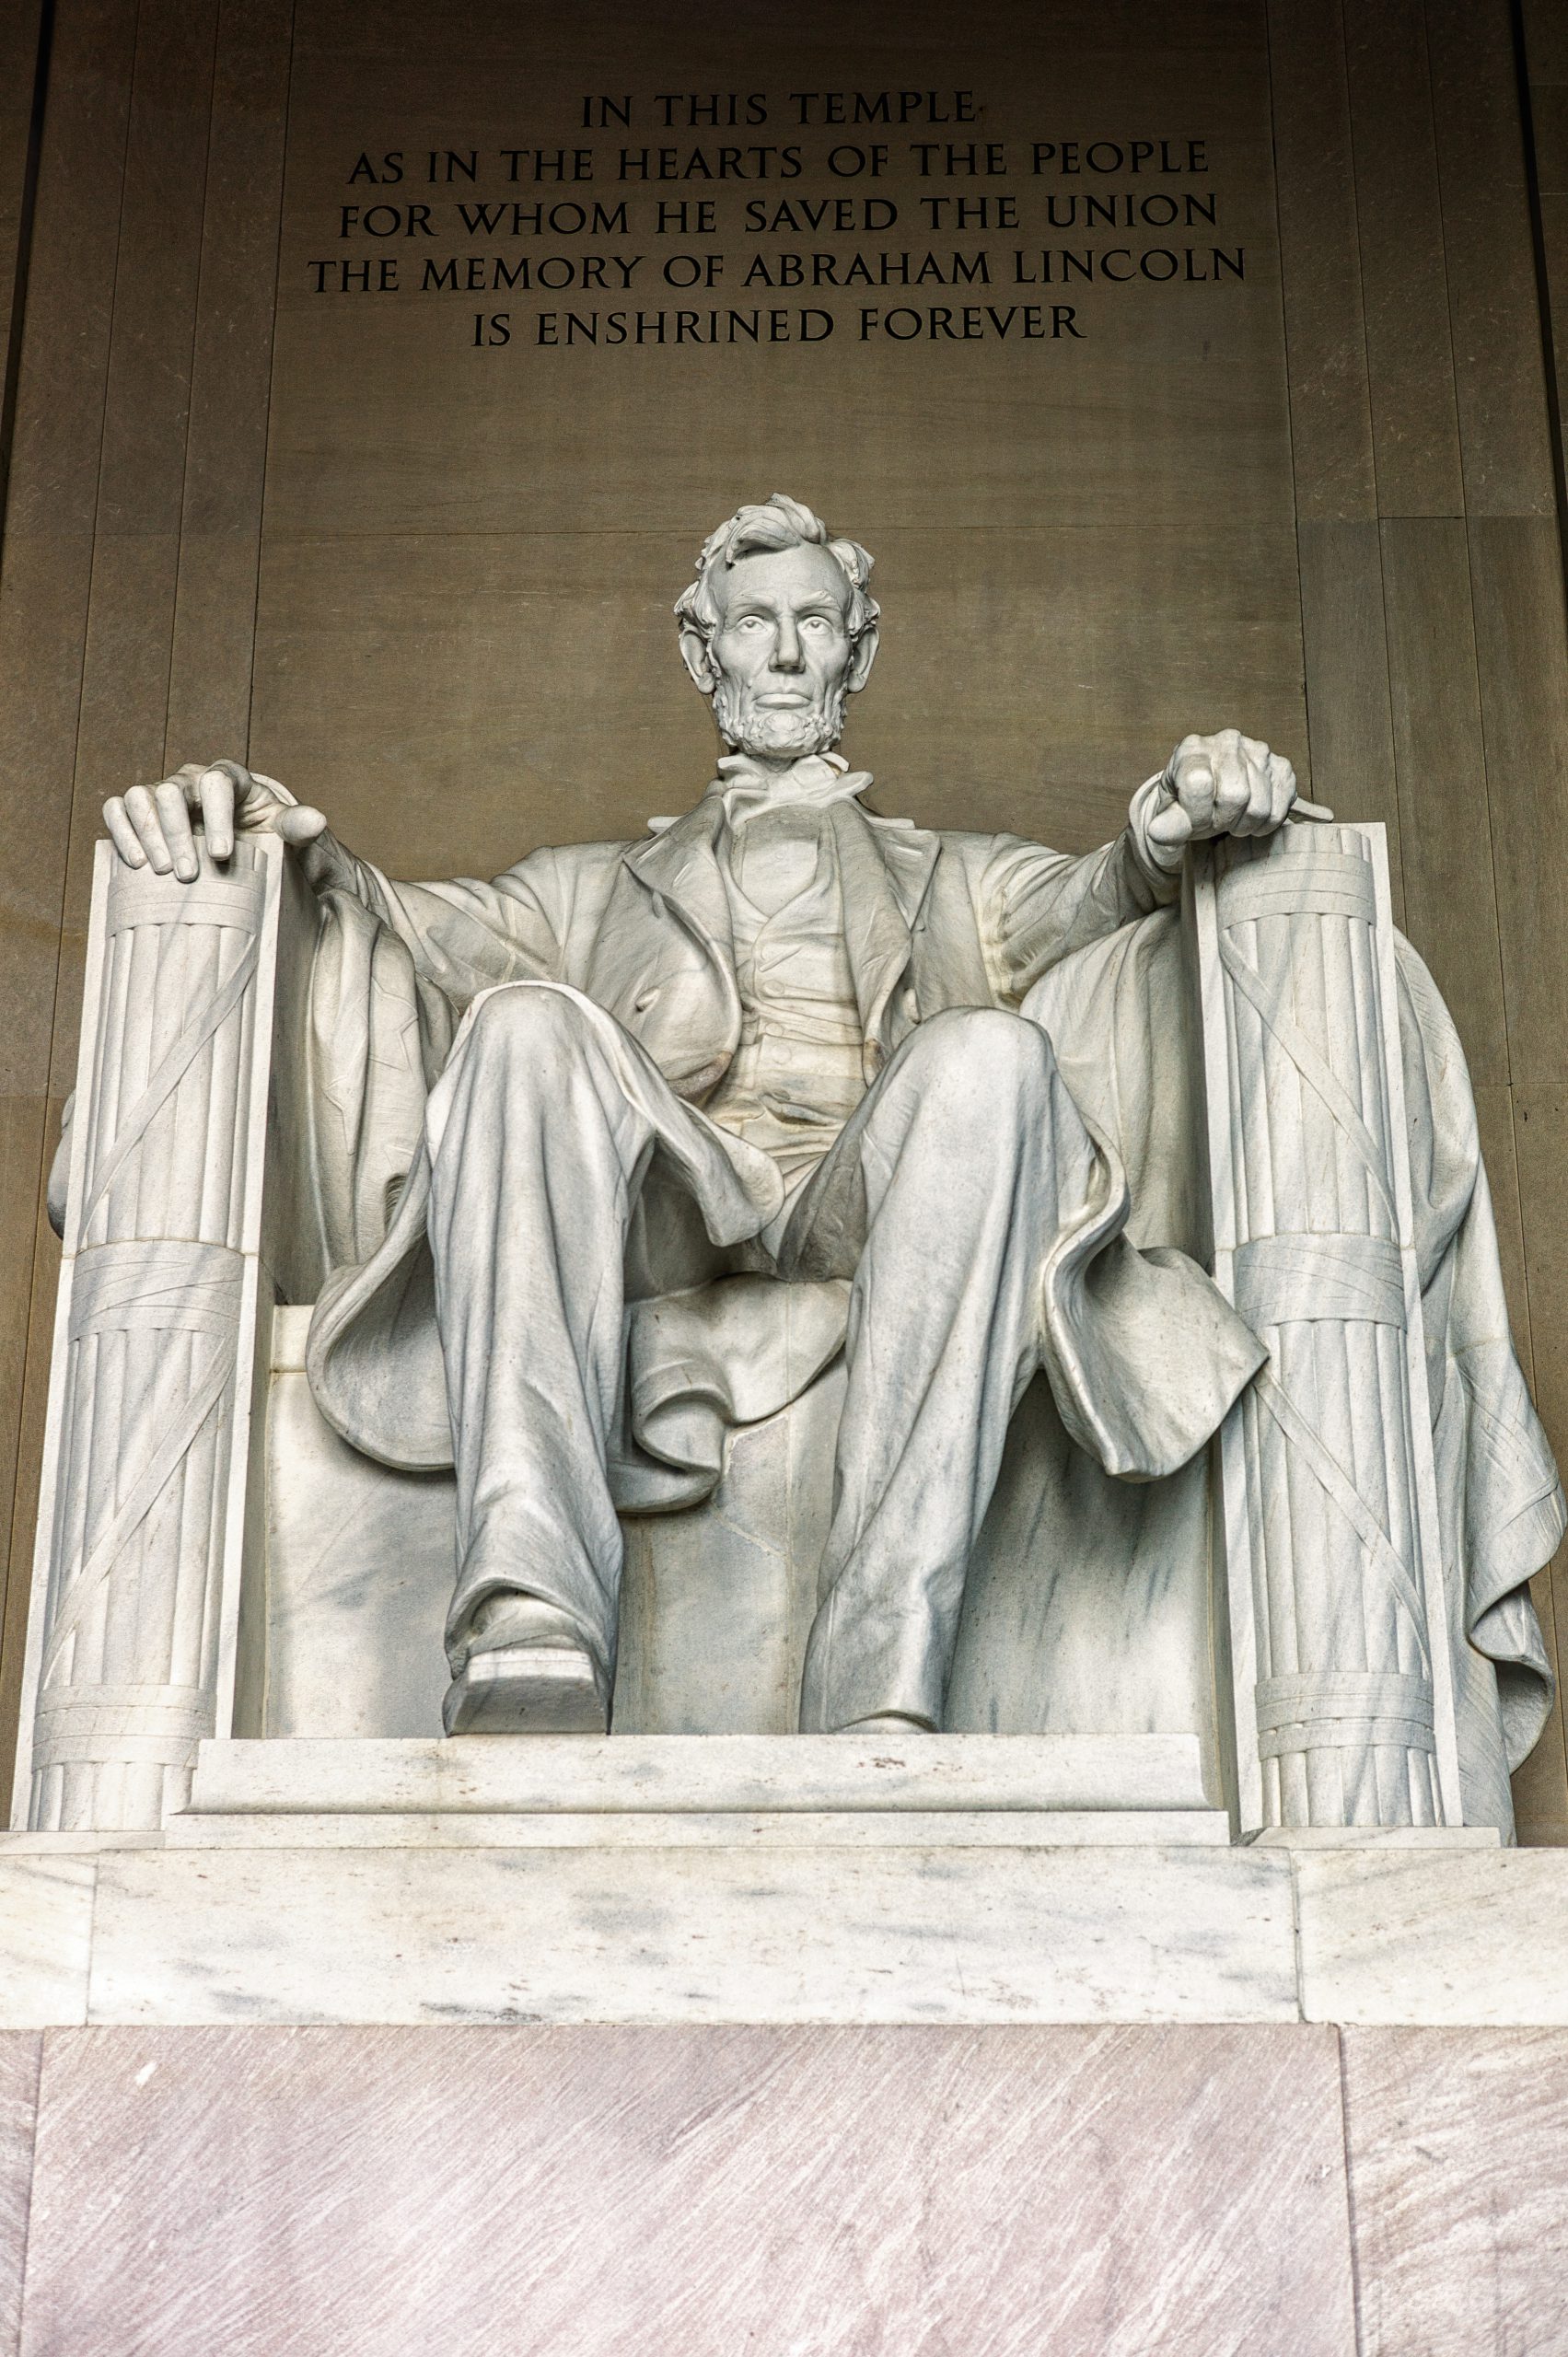 DC: The Lincoln Memorial